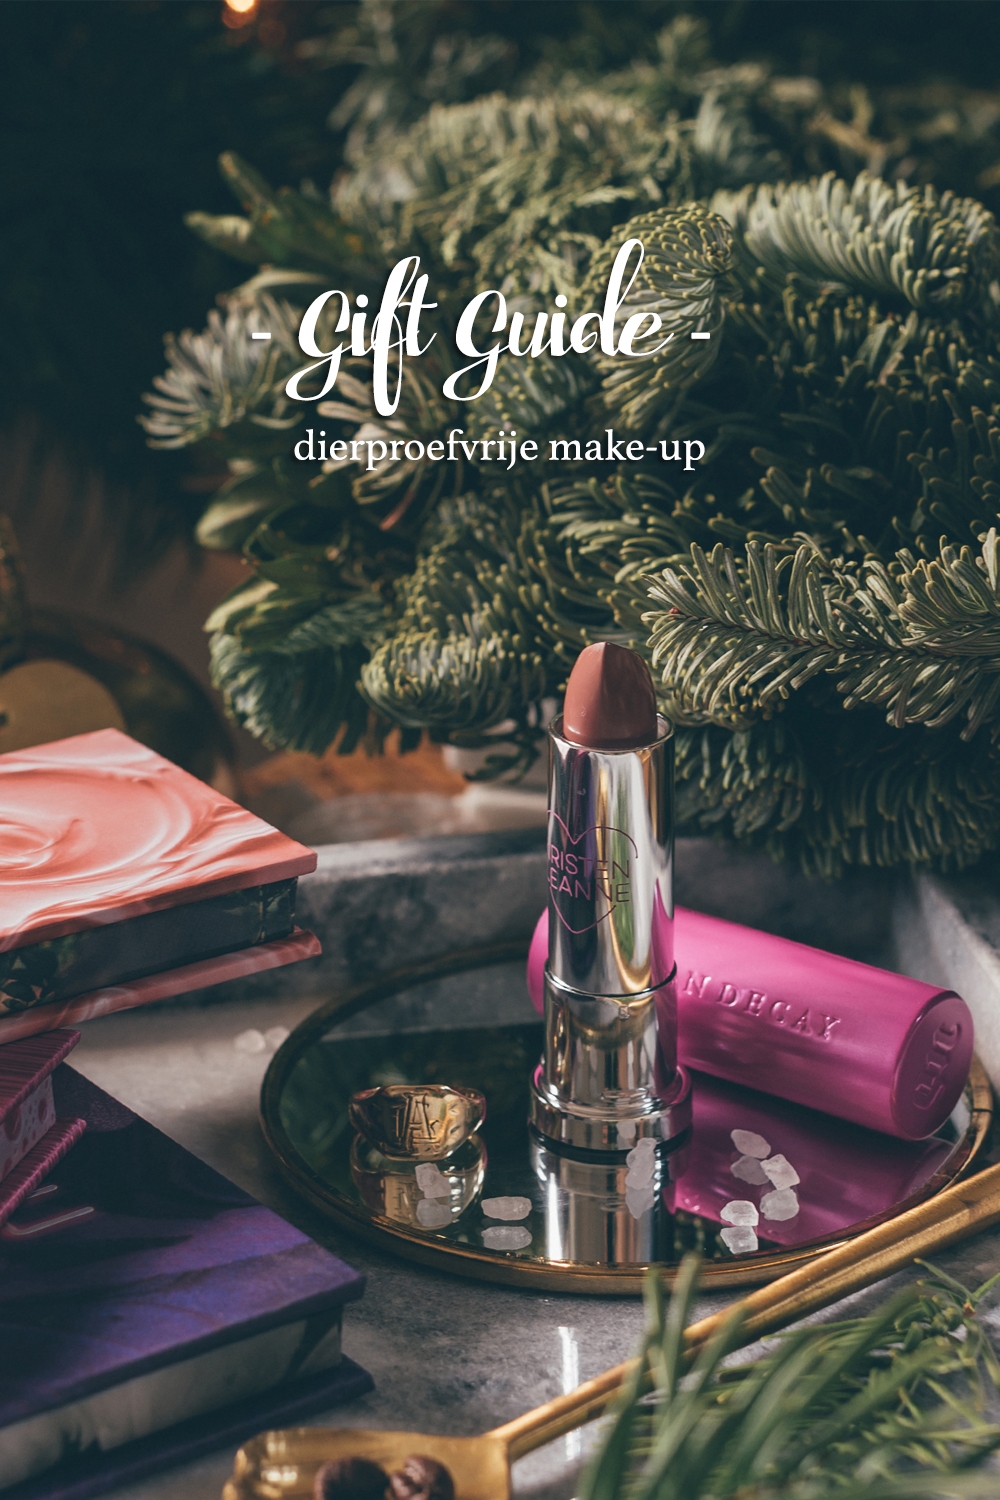 Gift Guide Cruelty Free Beauty Linda's Wholesome Life